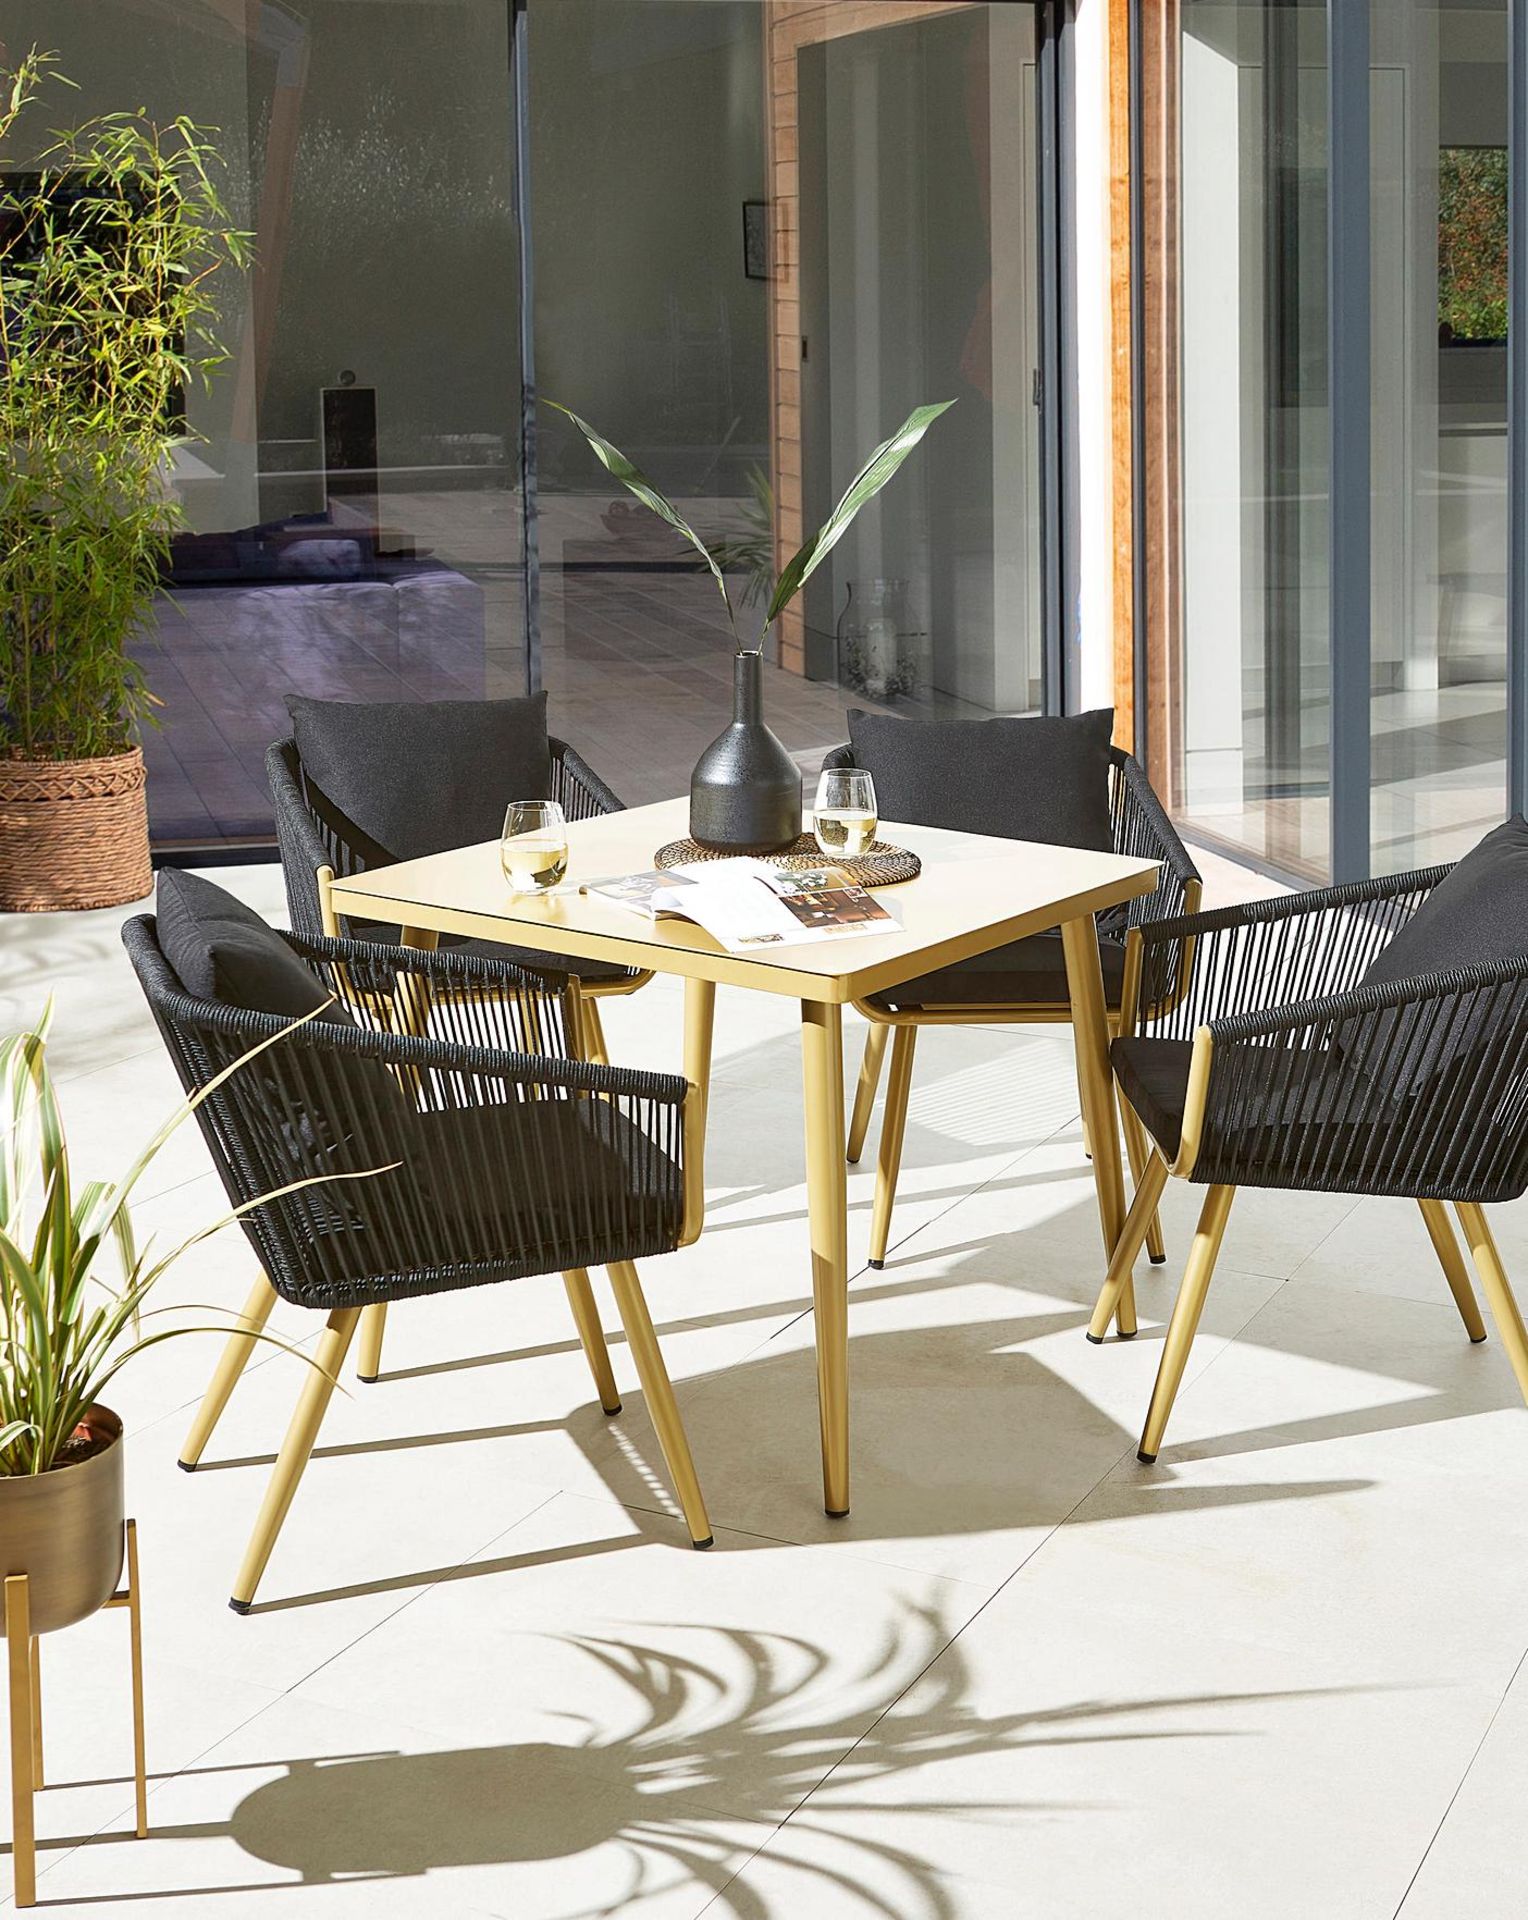 Trade Lot 4 x New & Packaged Joanna Hope Naya 4 Seater Dining Sets. RRP £719 each. This Exclusive